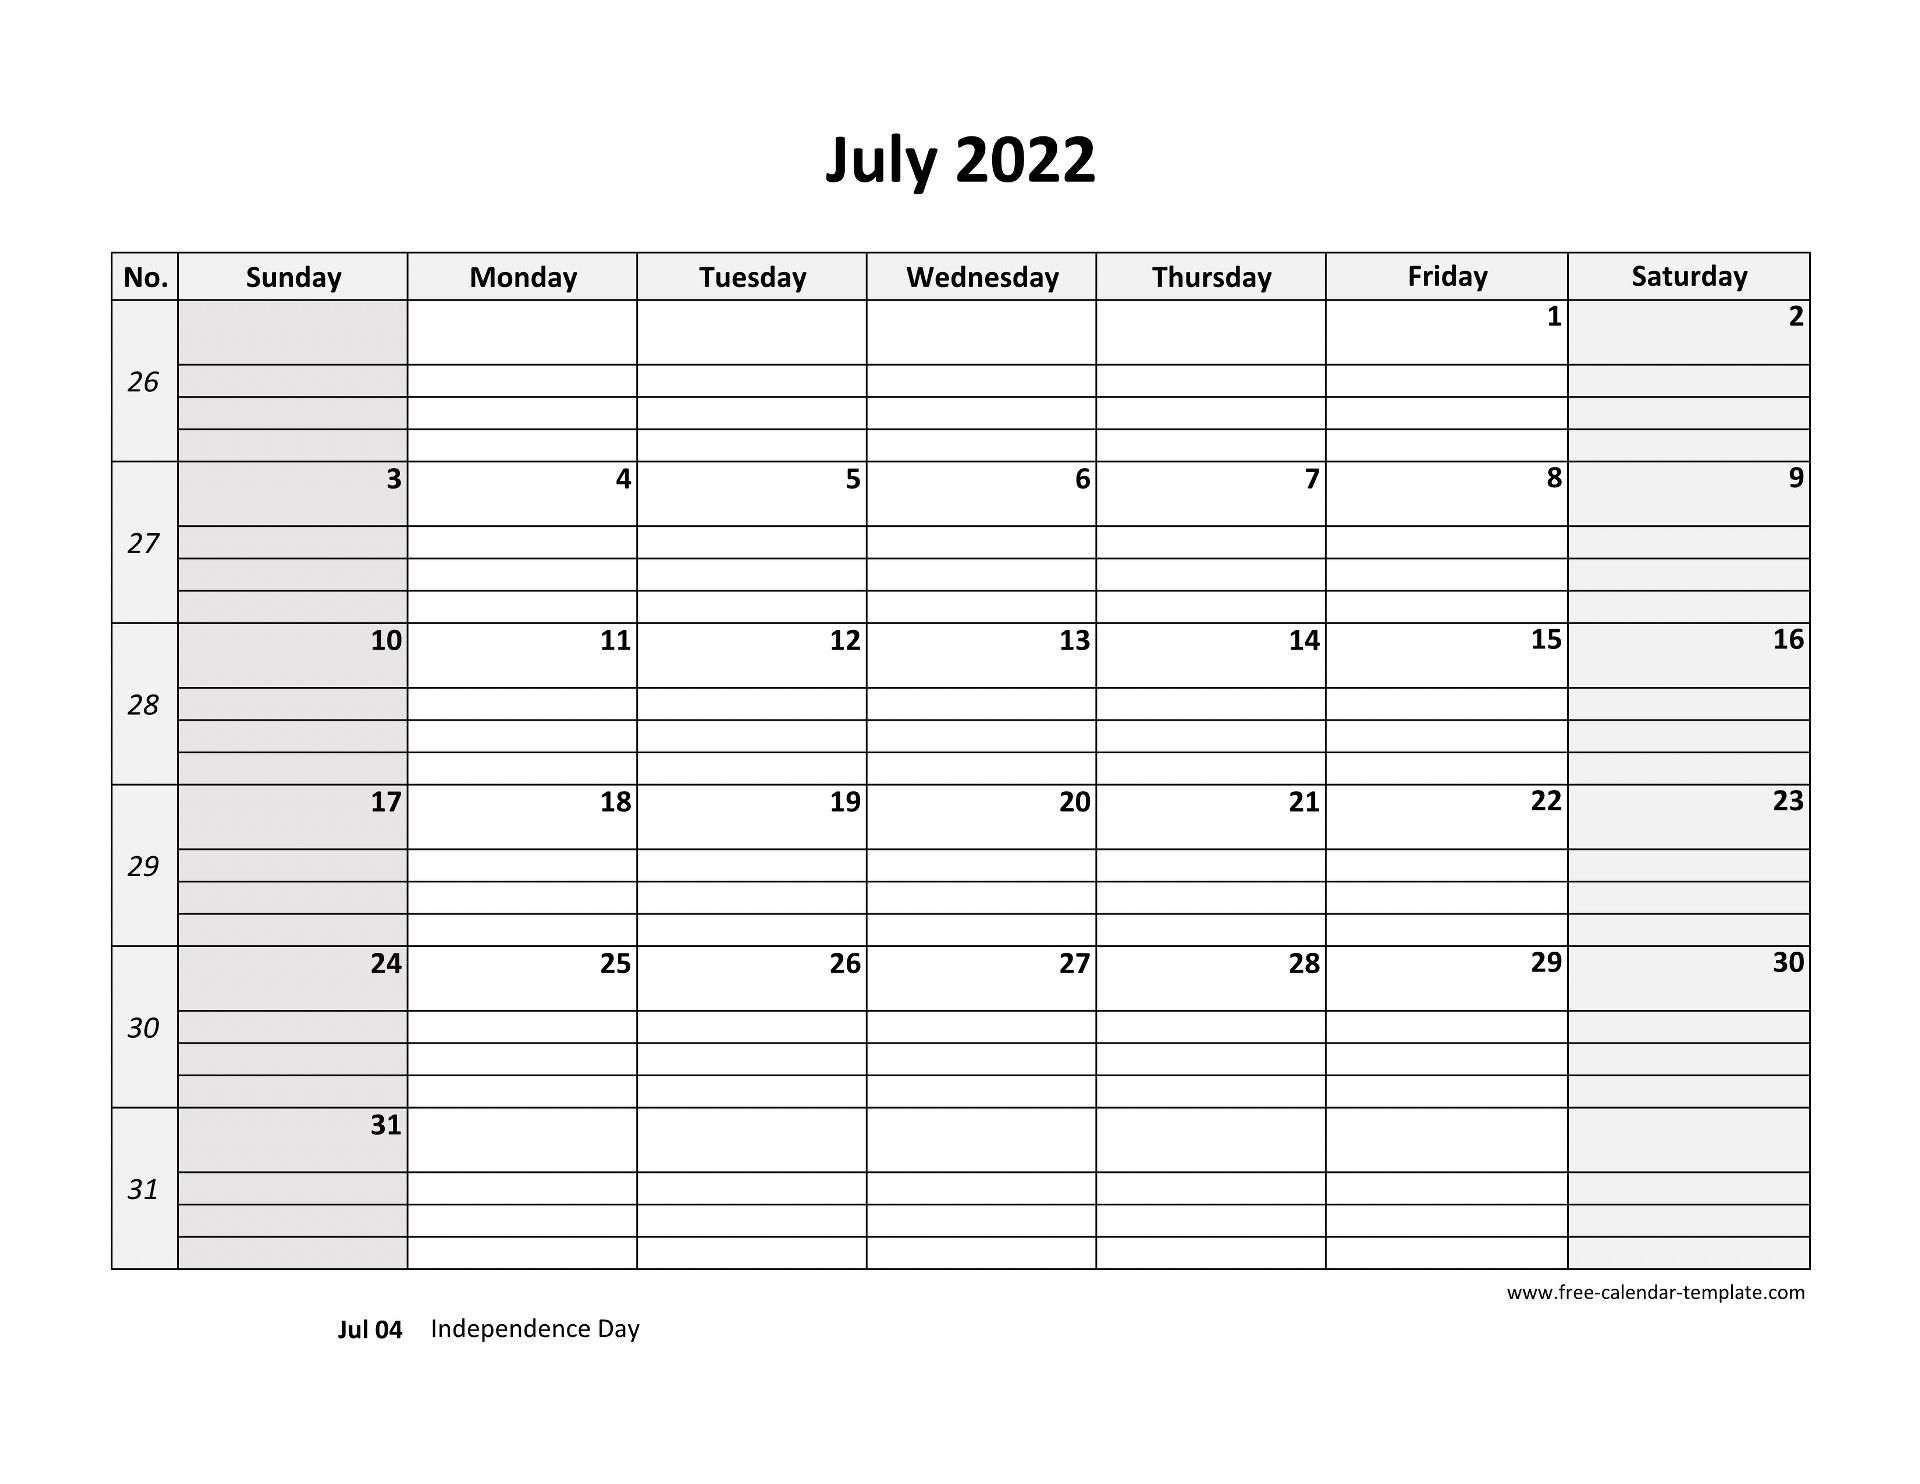 July 2022 Calendar Free Printable with grid lines designed